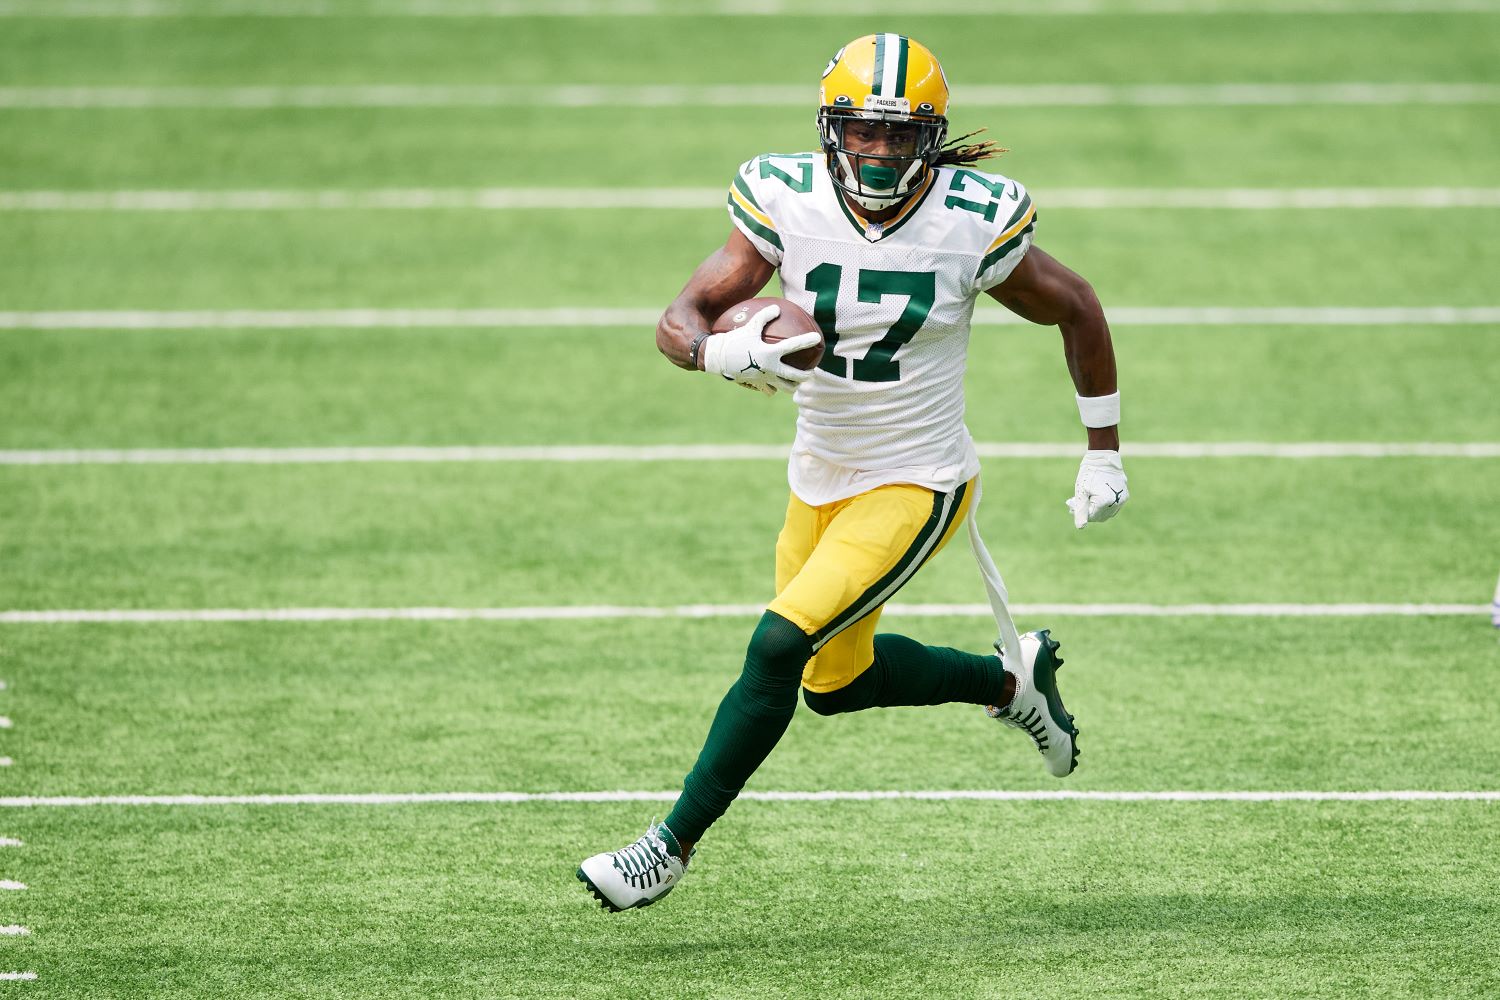 With Davante Adams proving he's the best receiver in the NFL, the Green Bay Packers need to decide whether they will pay him accordingly.